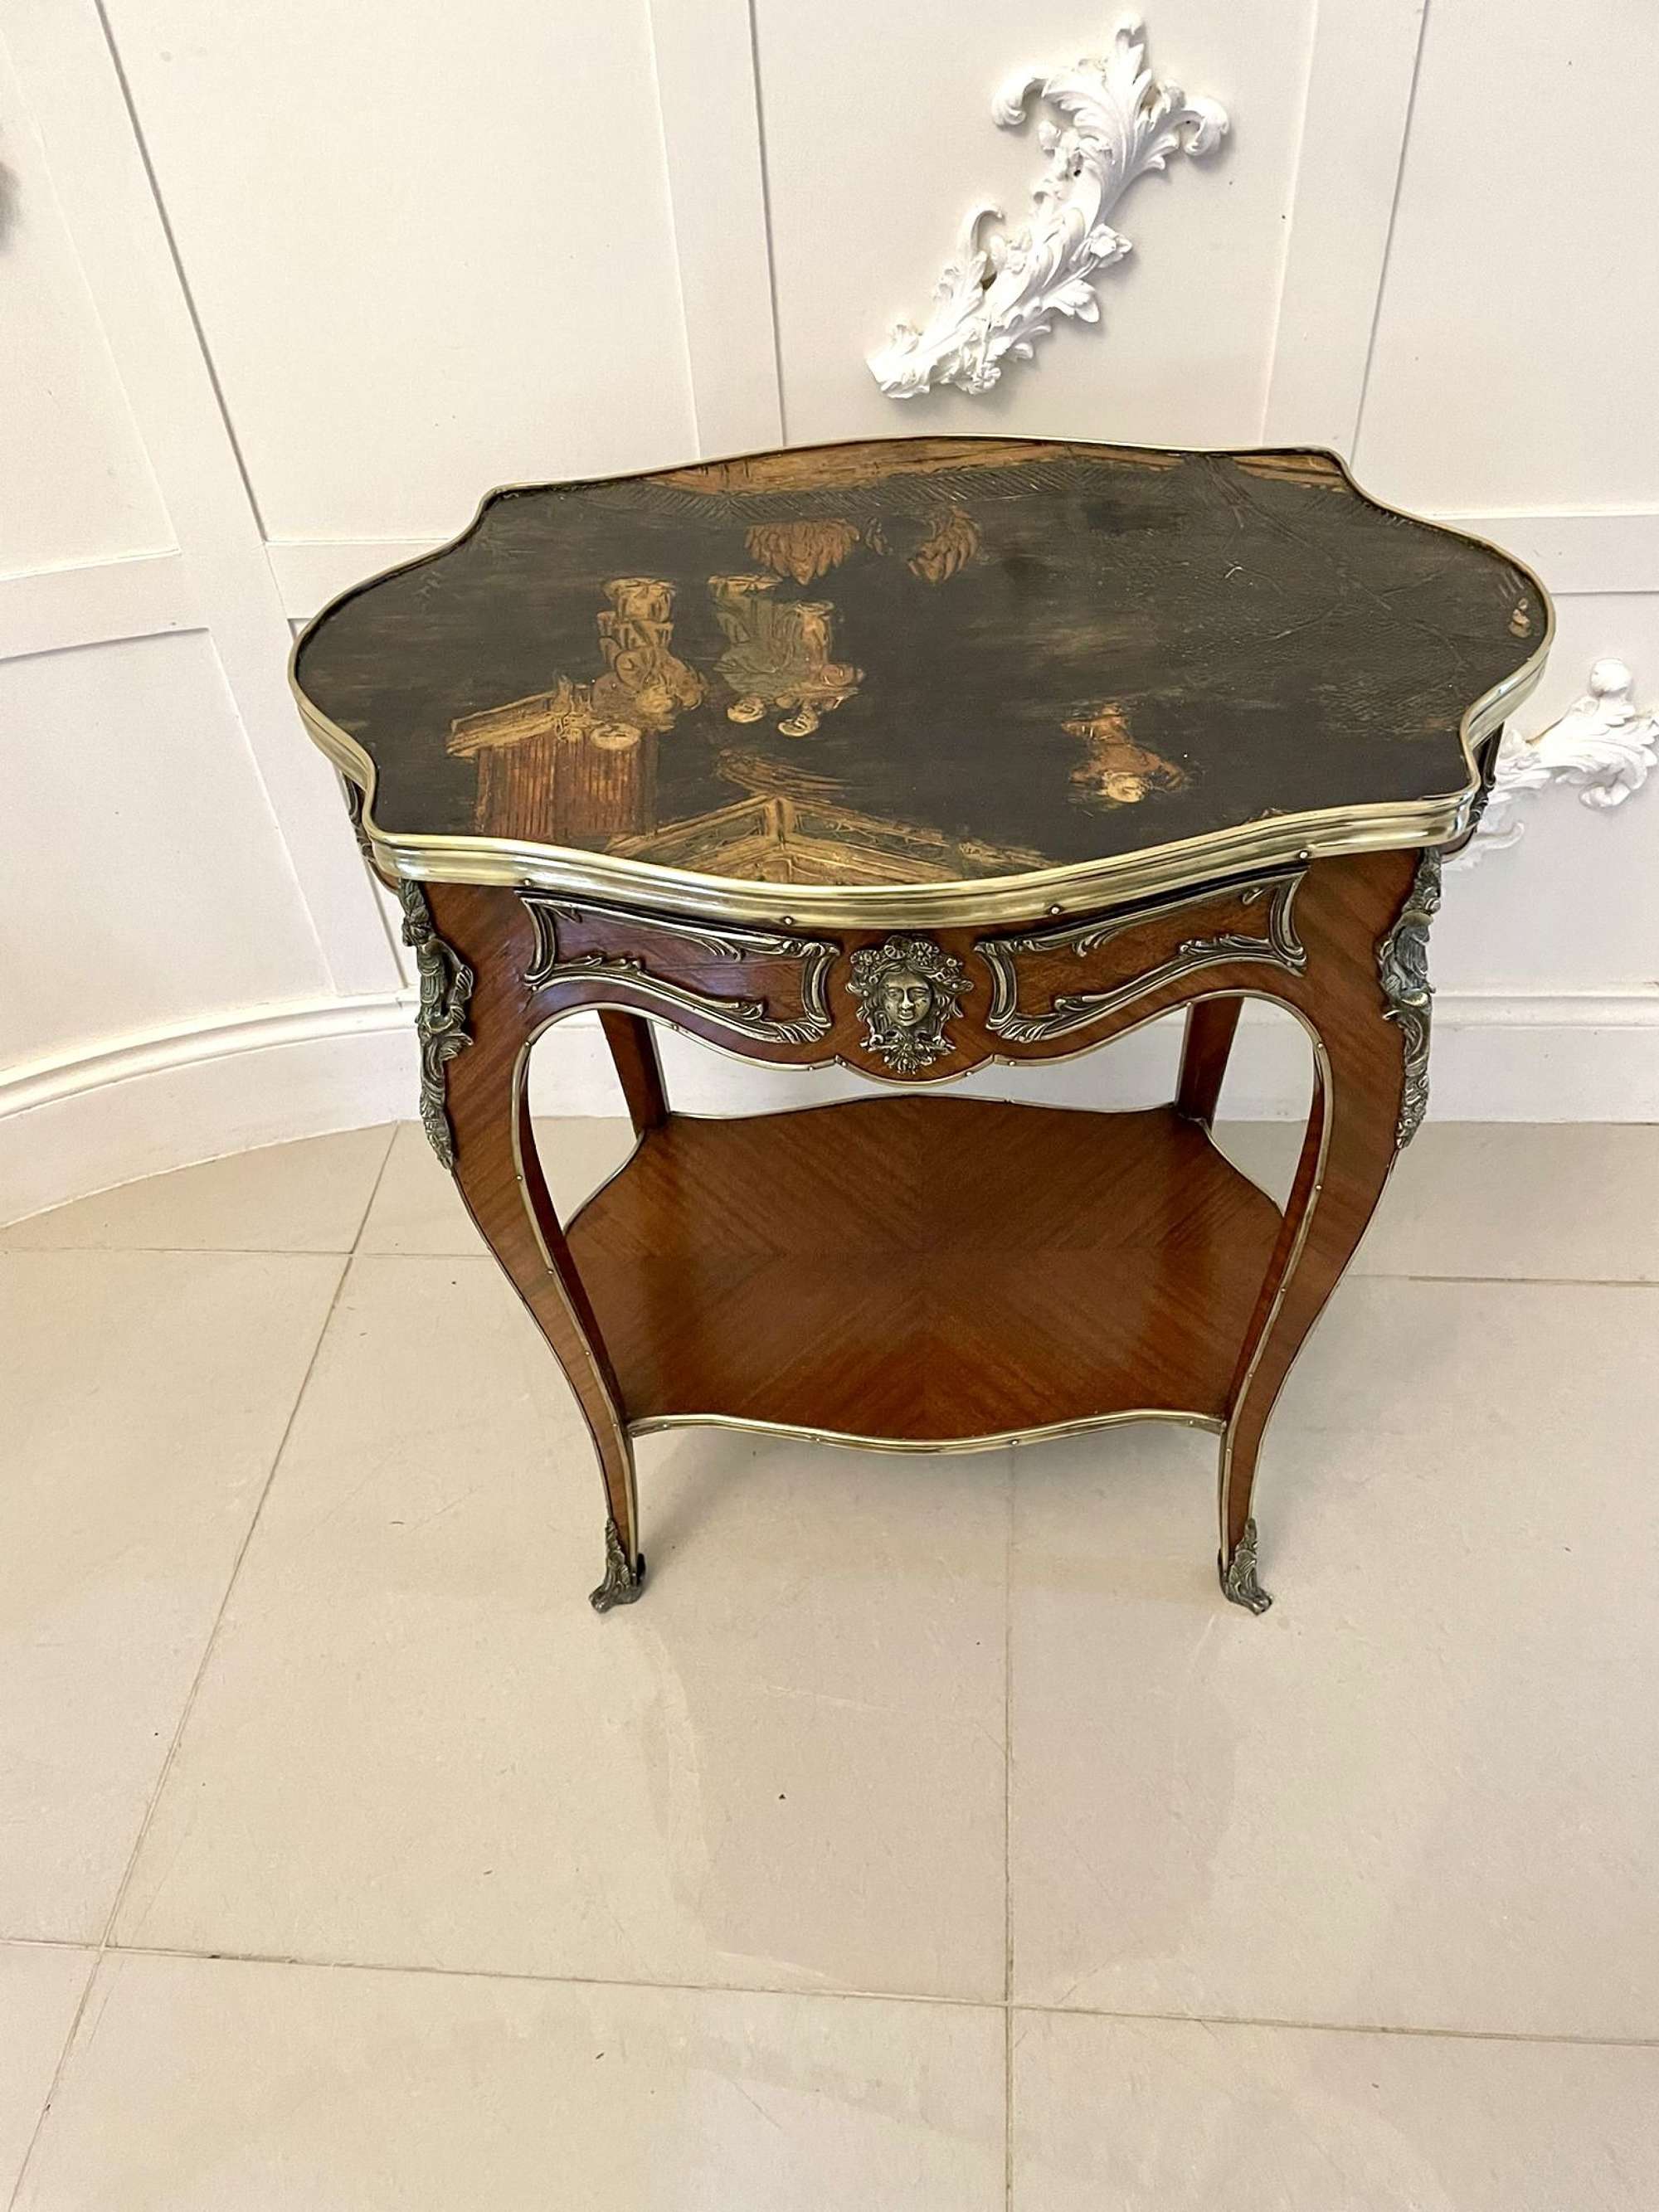 Quality Antique Kingwood And Ormolu Mounted Freestanding Centre Table